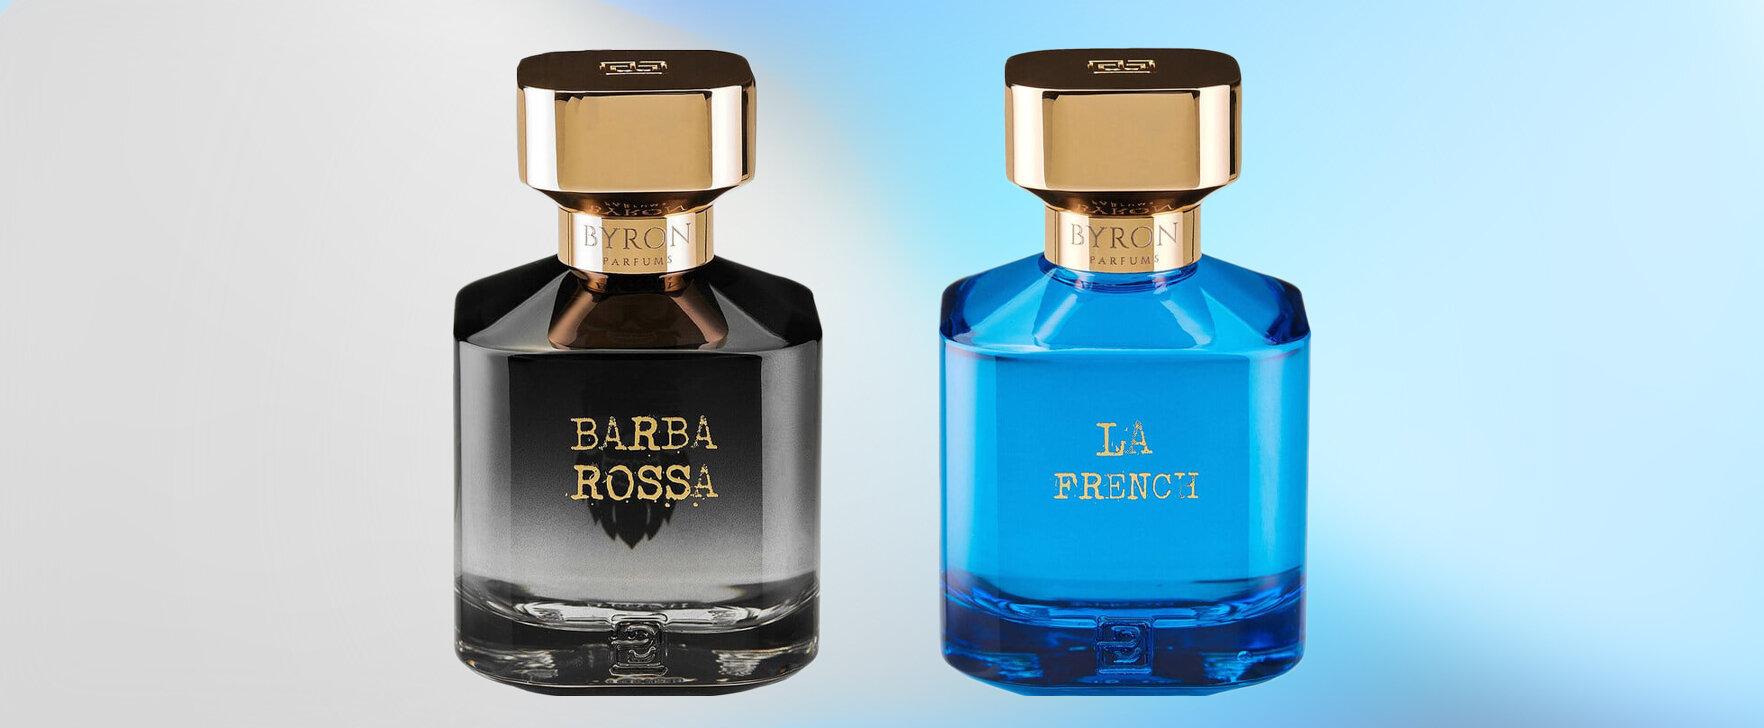 Barba Rossa and La French: The New Extraits de Parfum From Byron Parfums